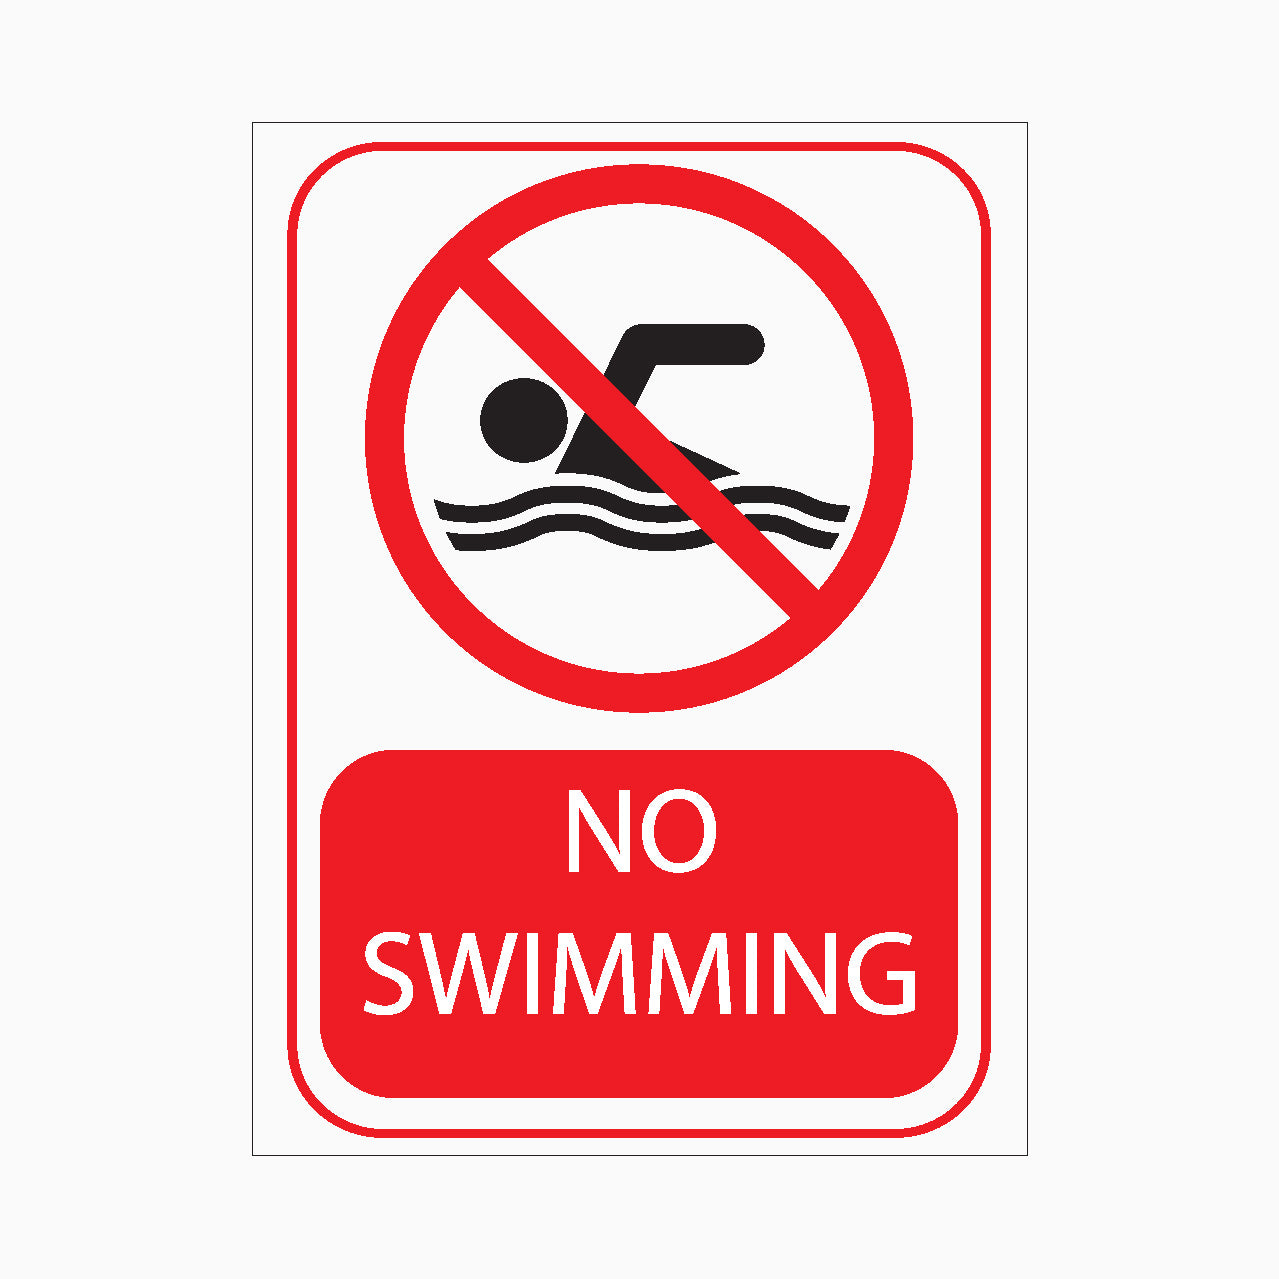 NO SWIMMING SIGN - prohibition sign